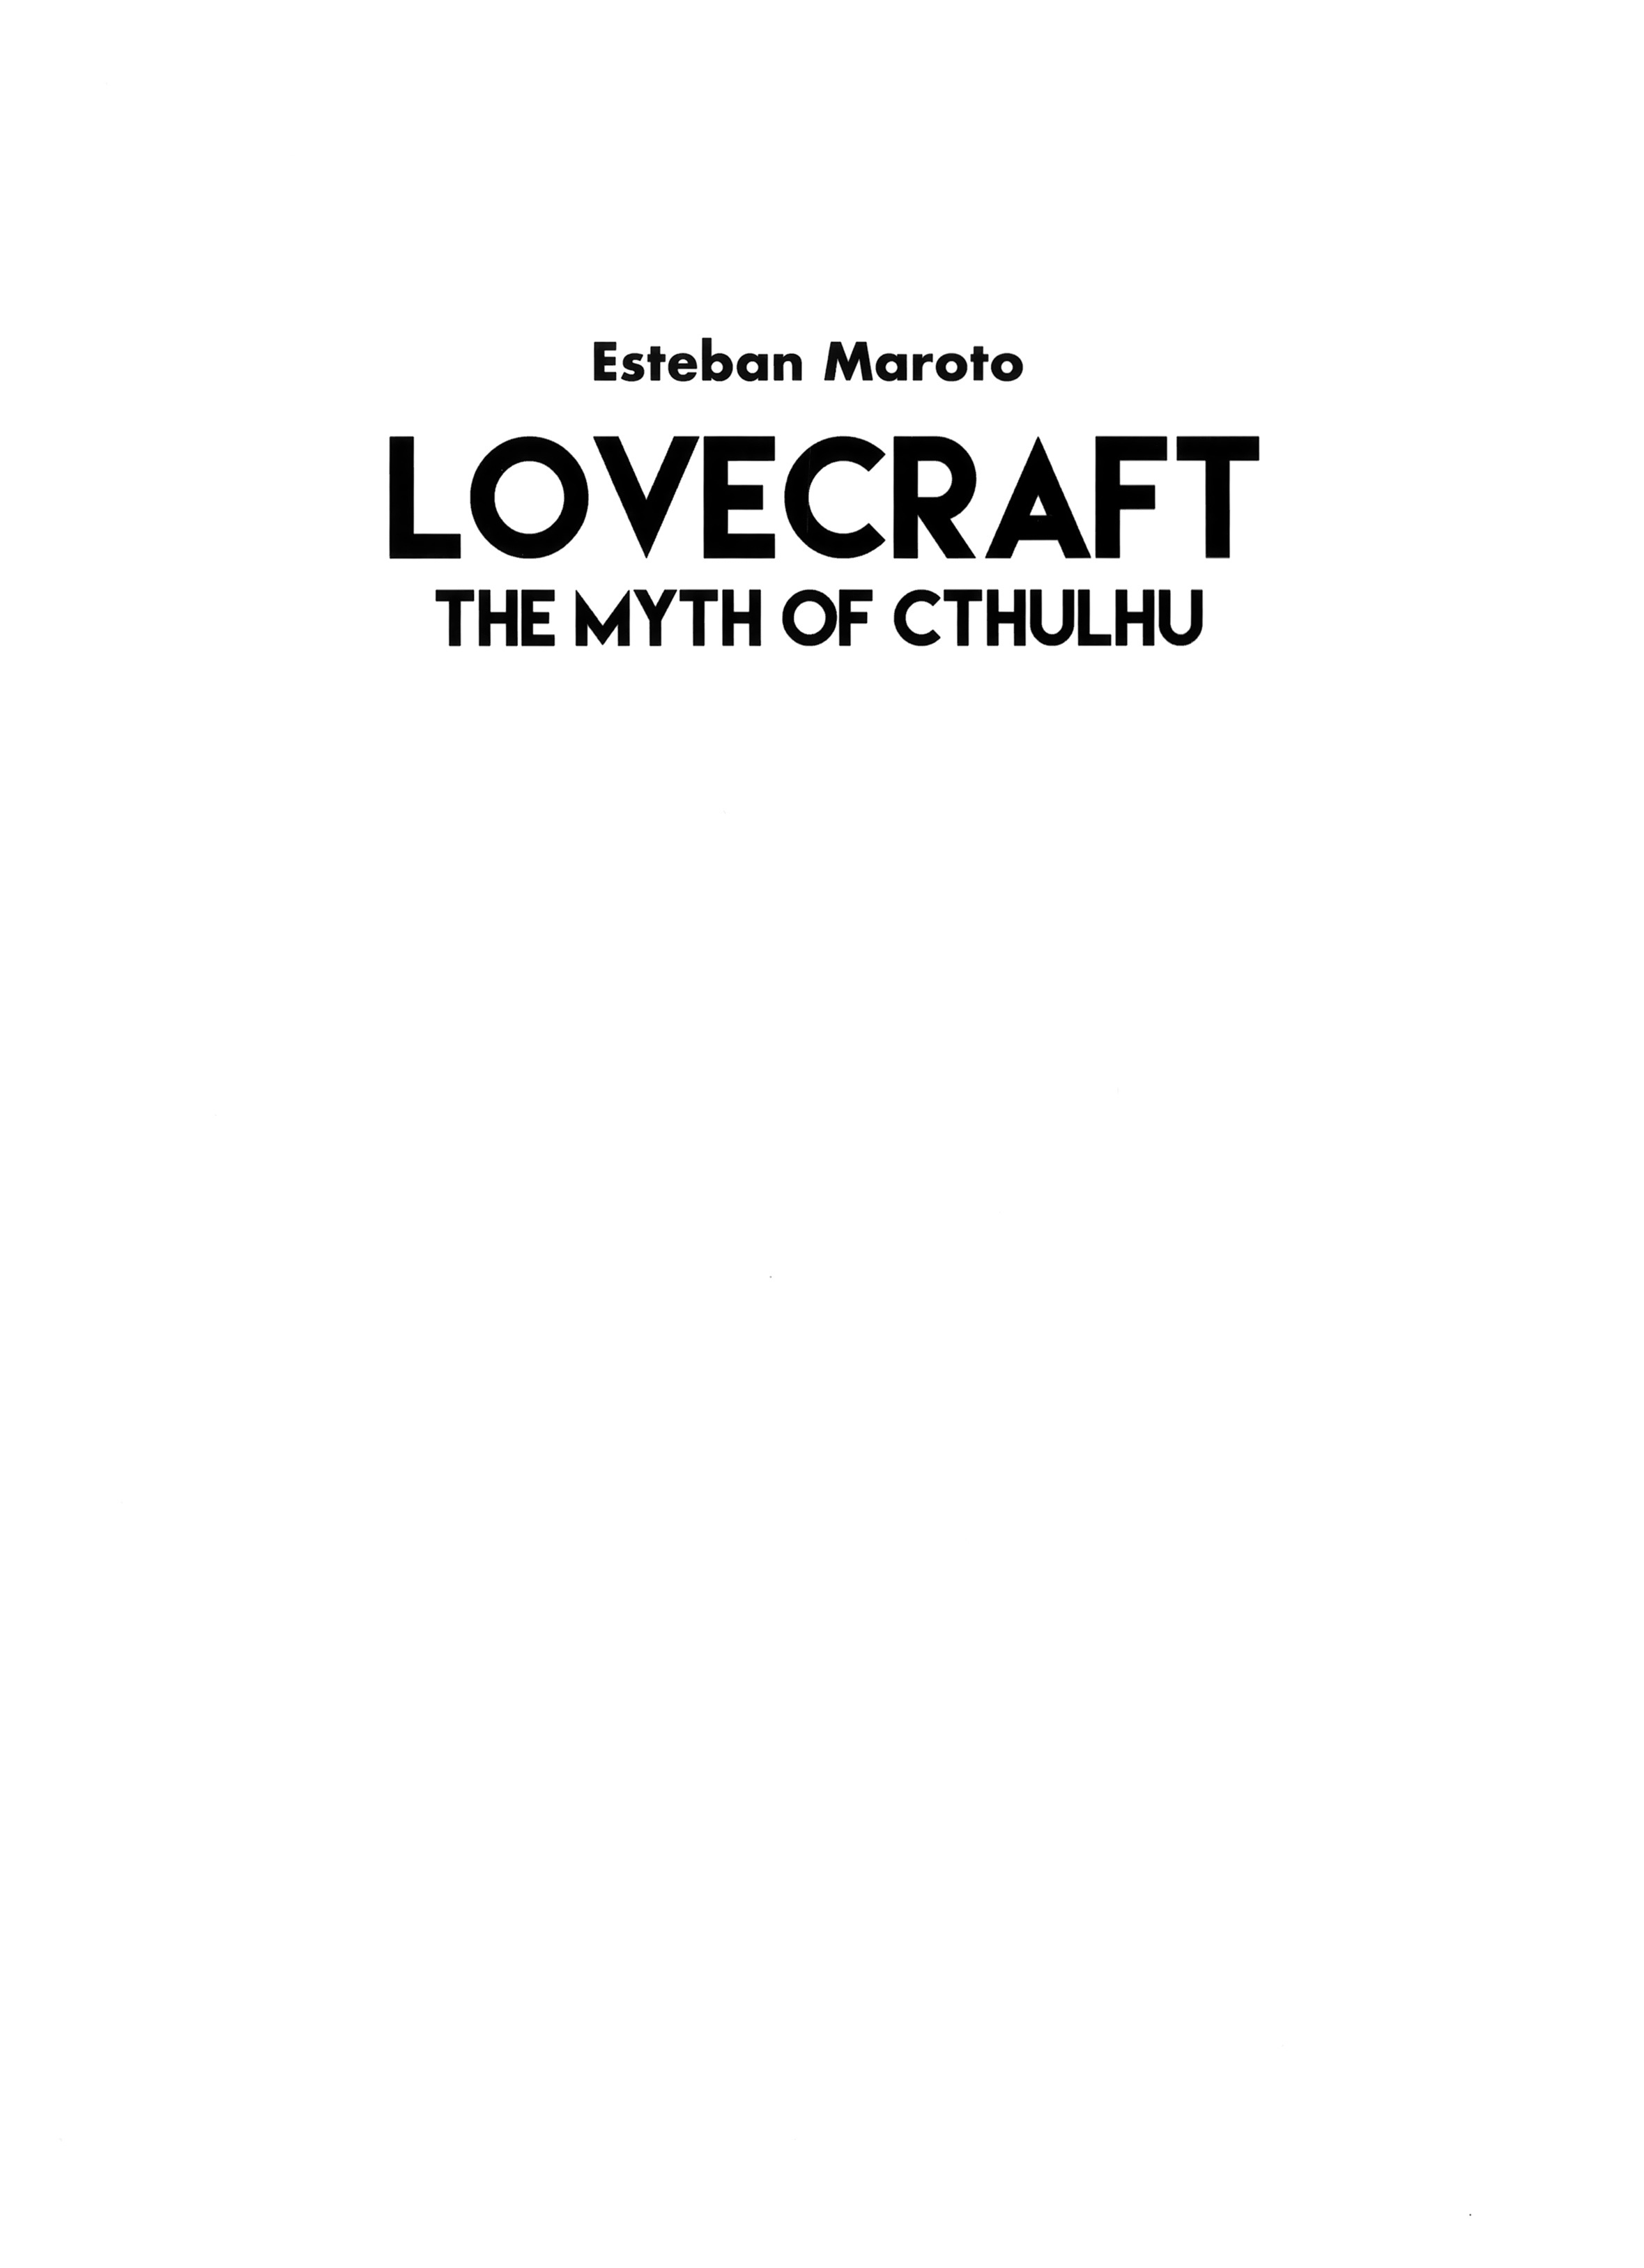 Read online Lovecraft: The Myth of Cthulhu comic -  Issue # TPB - 4